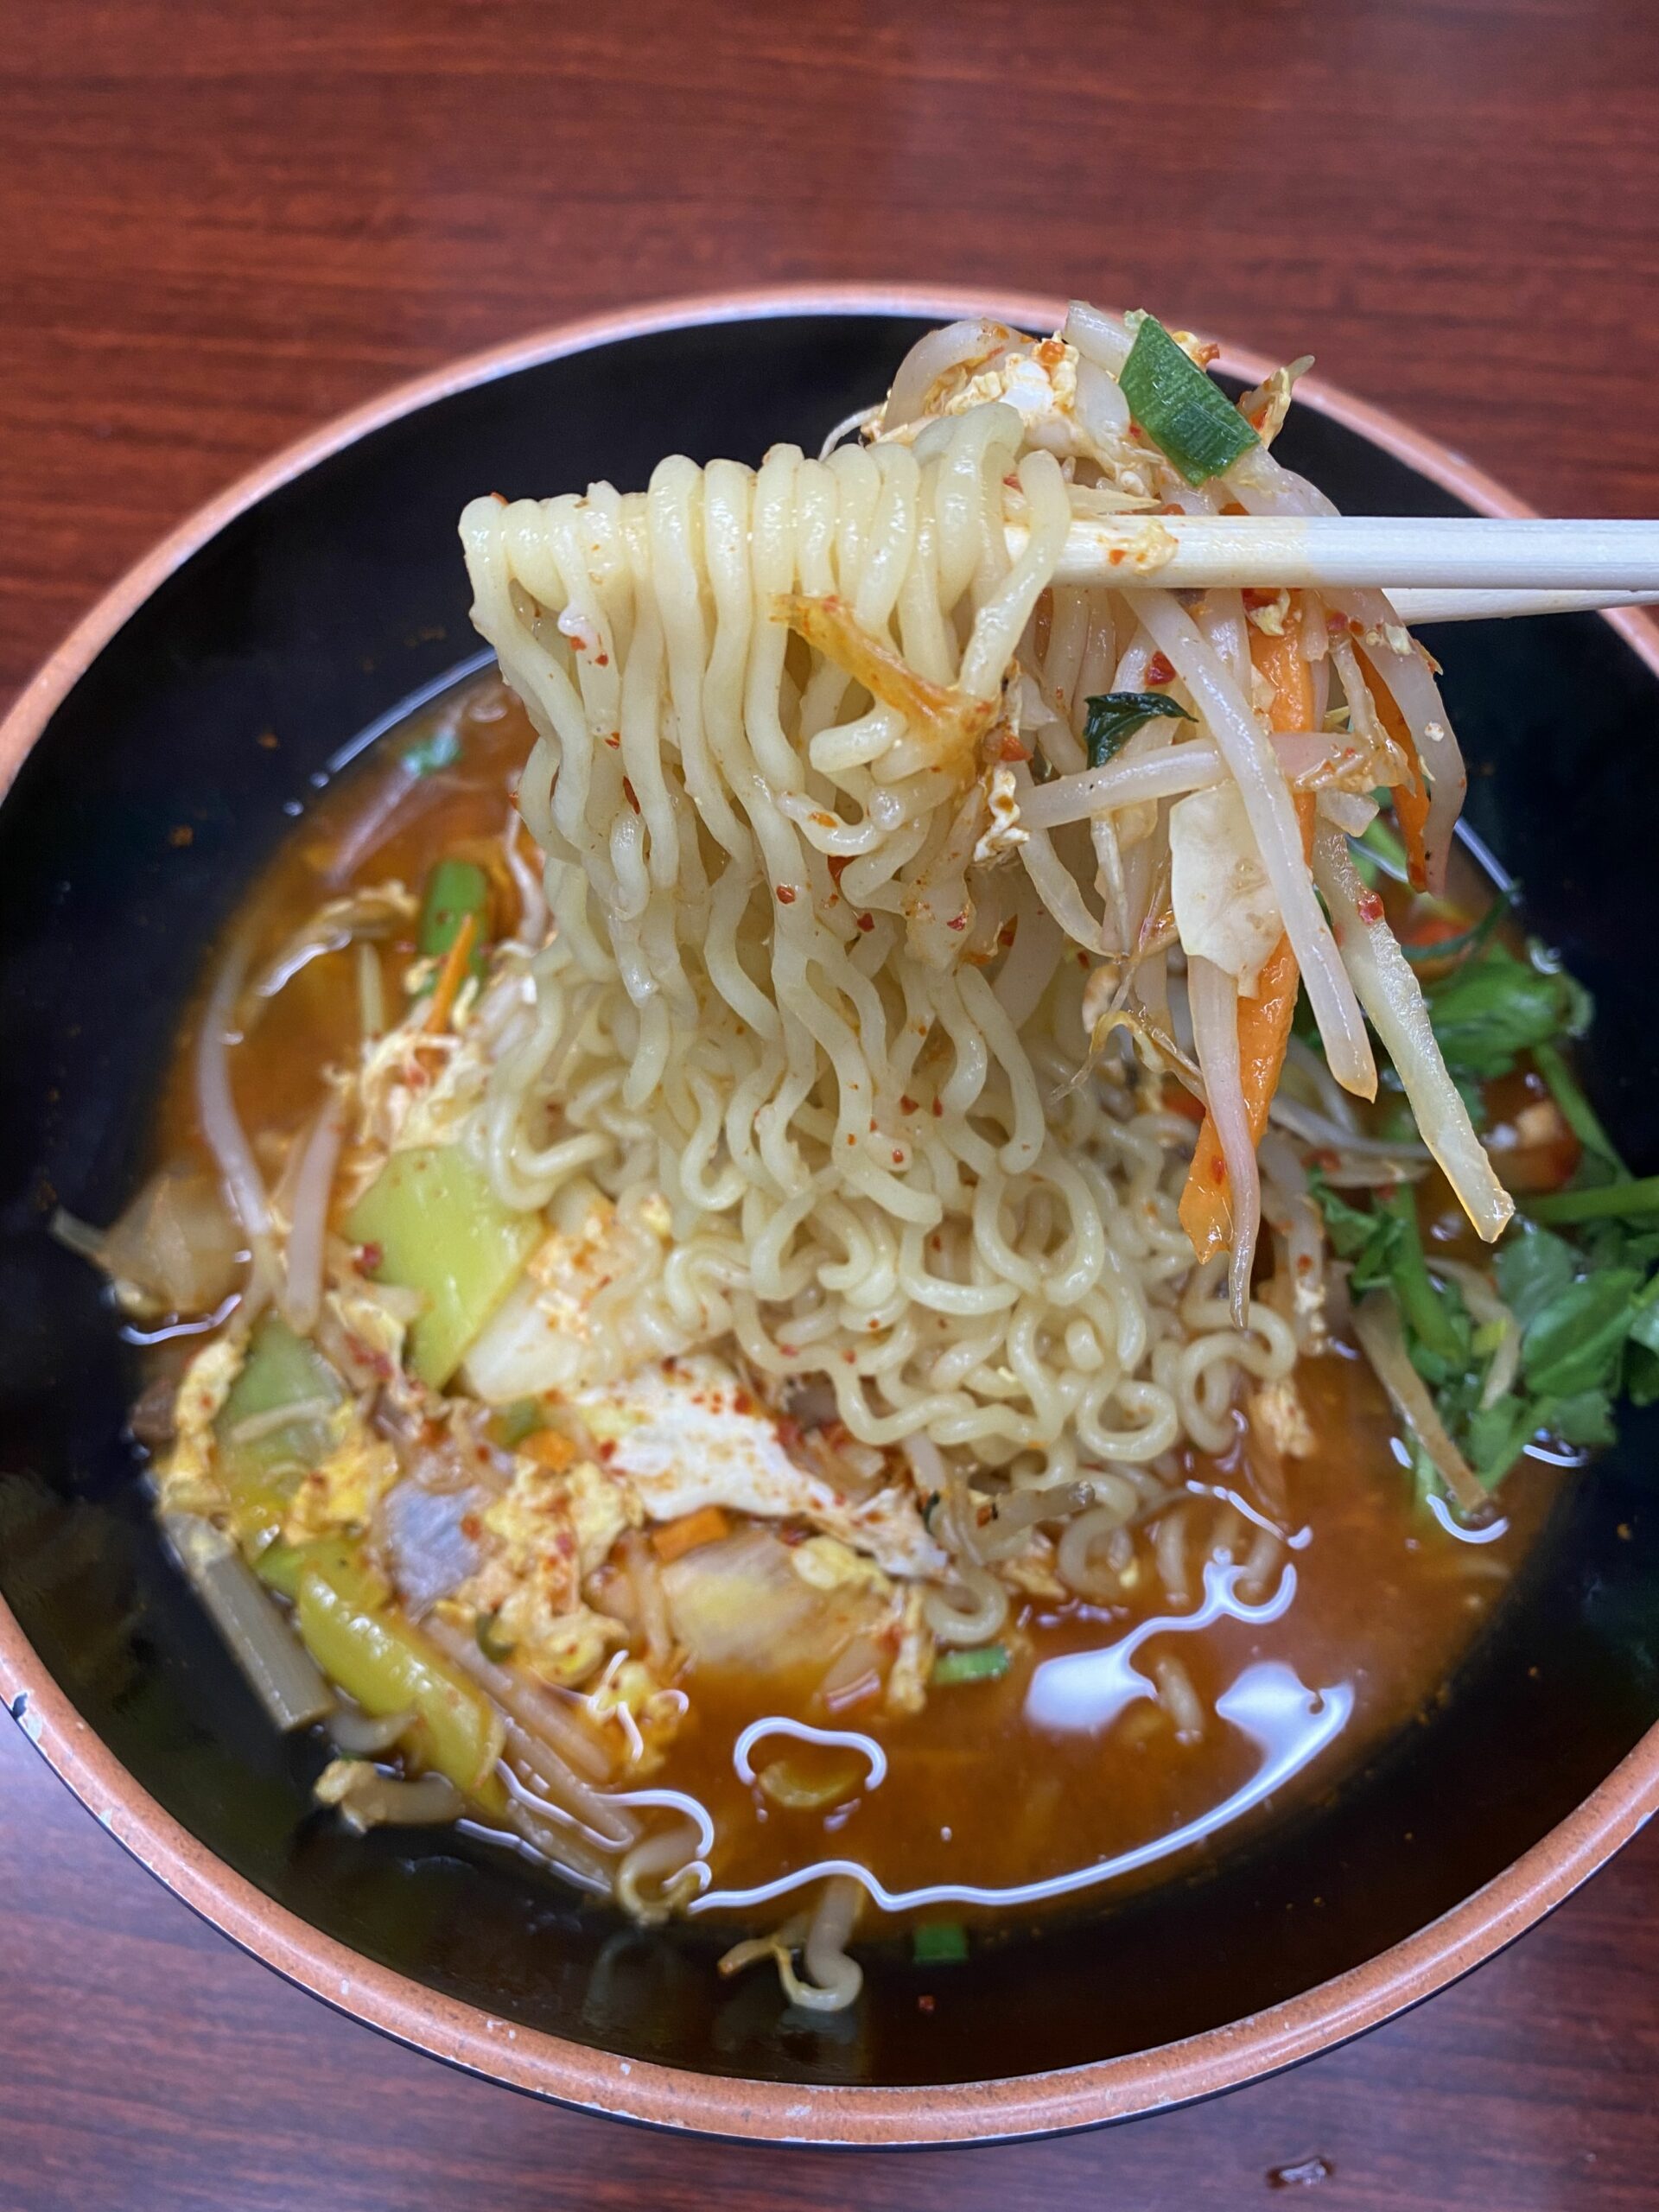 A bowl of spicy broth, Korean veggies and ramen noodles being held up with chopsticks